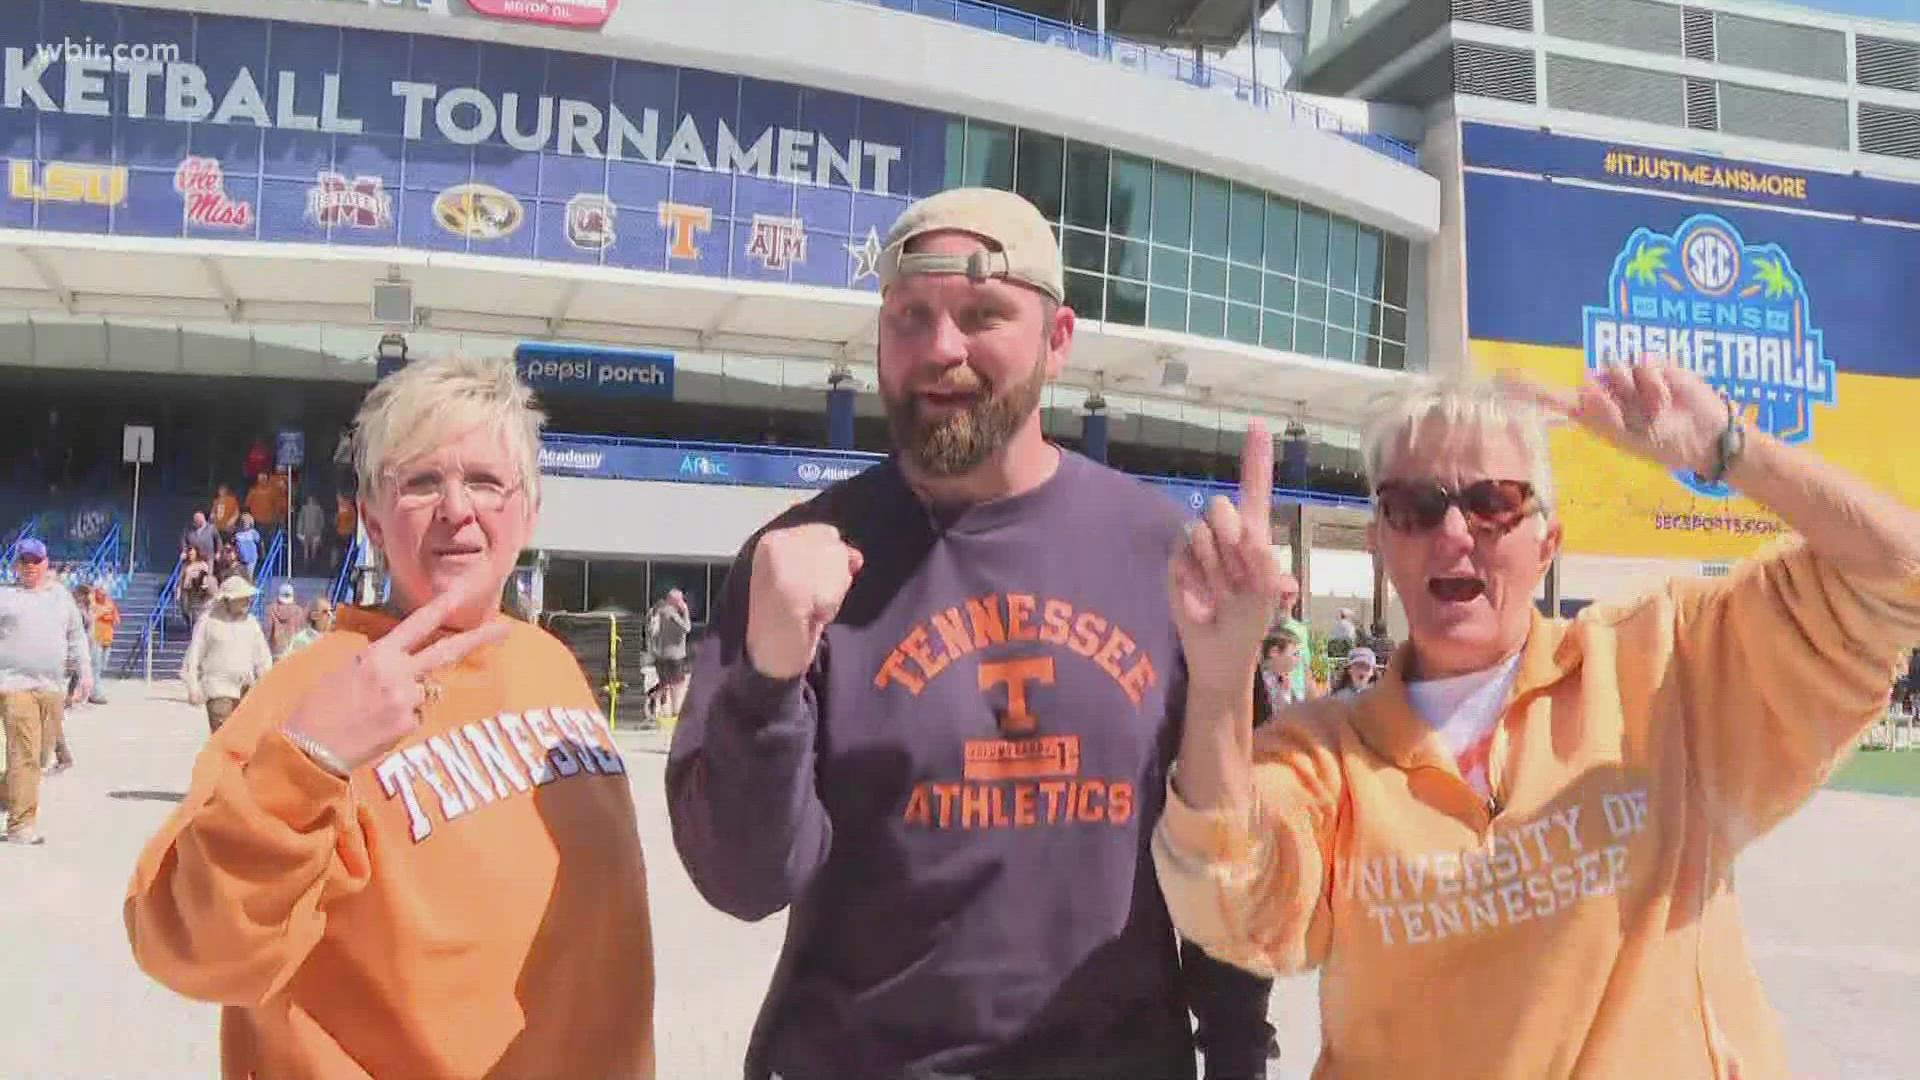 UT fans reacted to the Vols defeating Texas A&M 65-50 for the SEC Championship title.